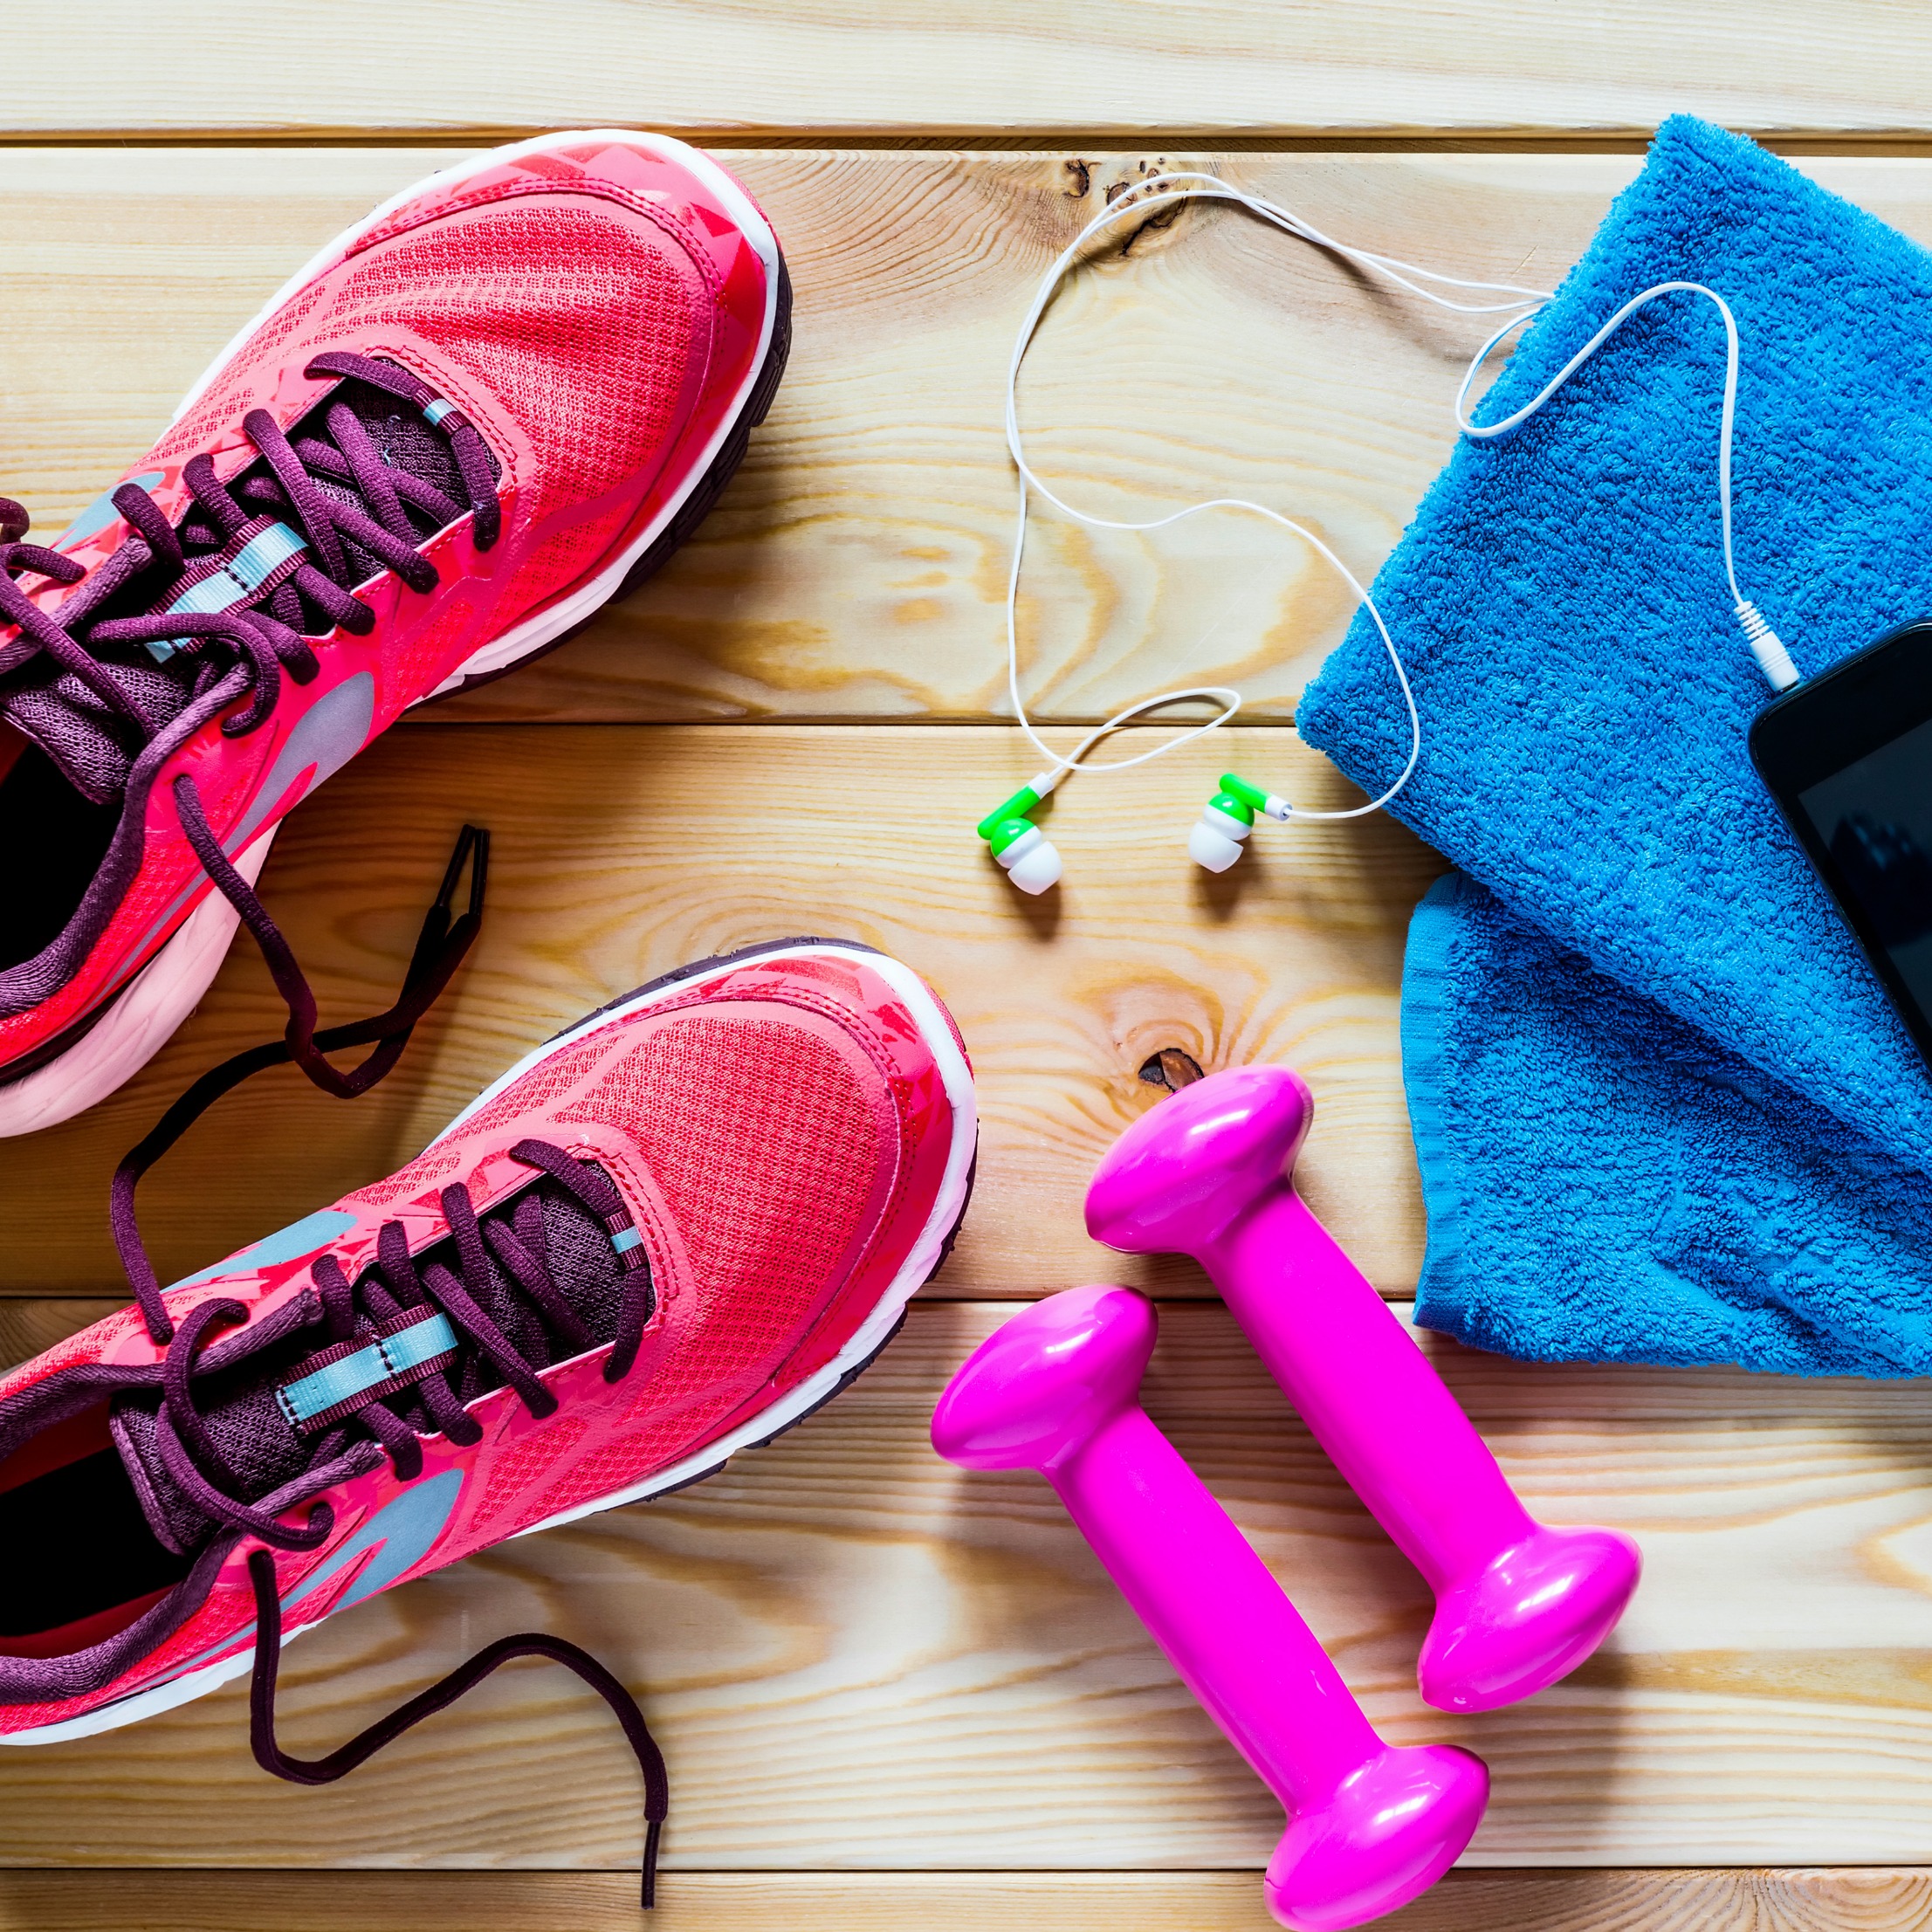 Healthy Habits: All About Exercise